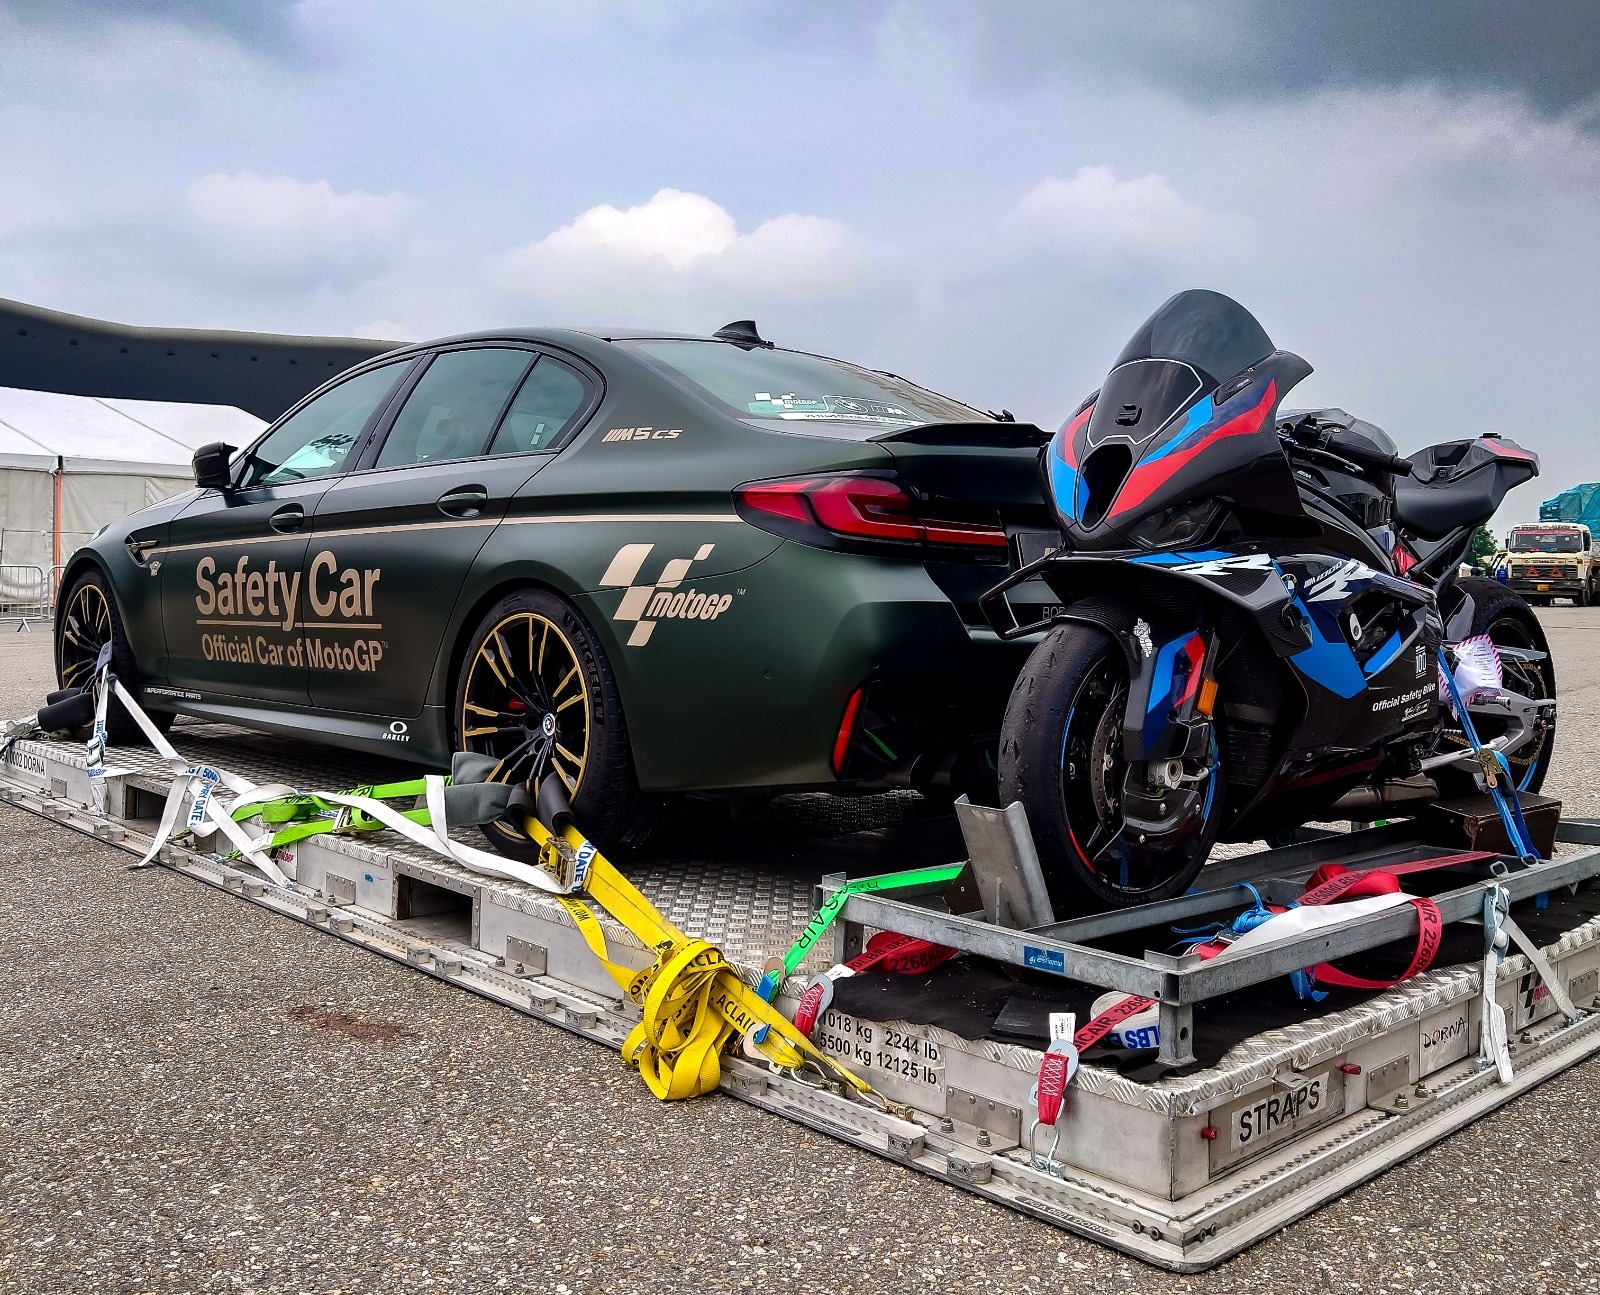 The MotoGP Bharat safety car and bike arrive for the big showdown this weekend